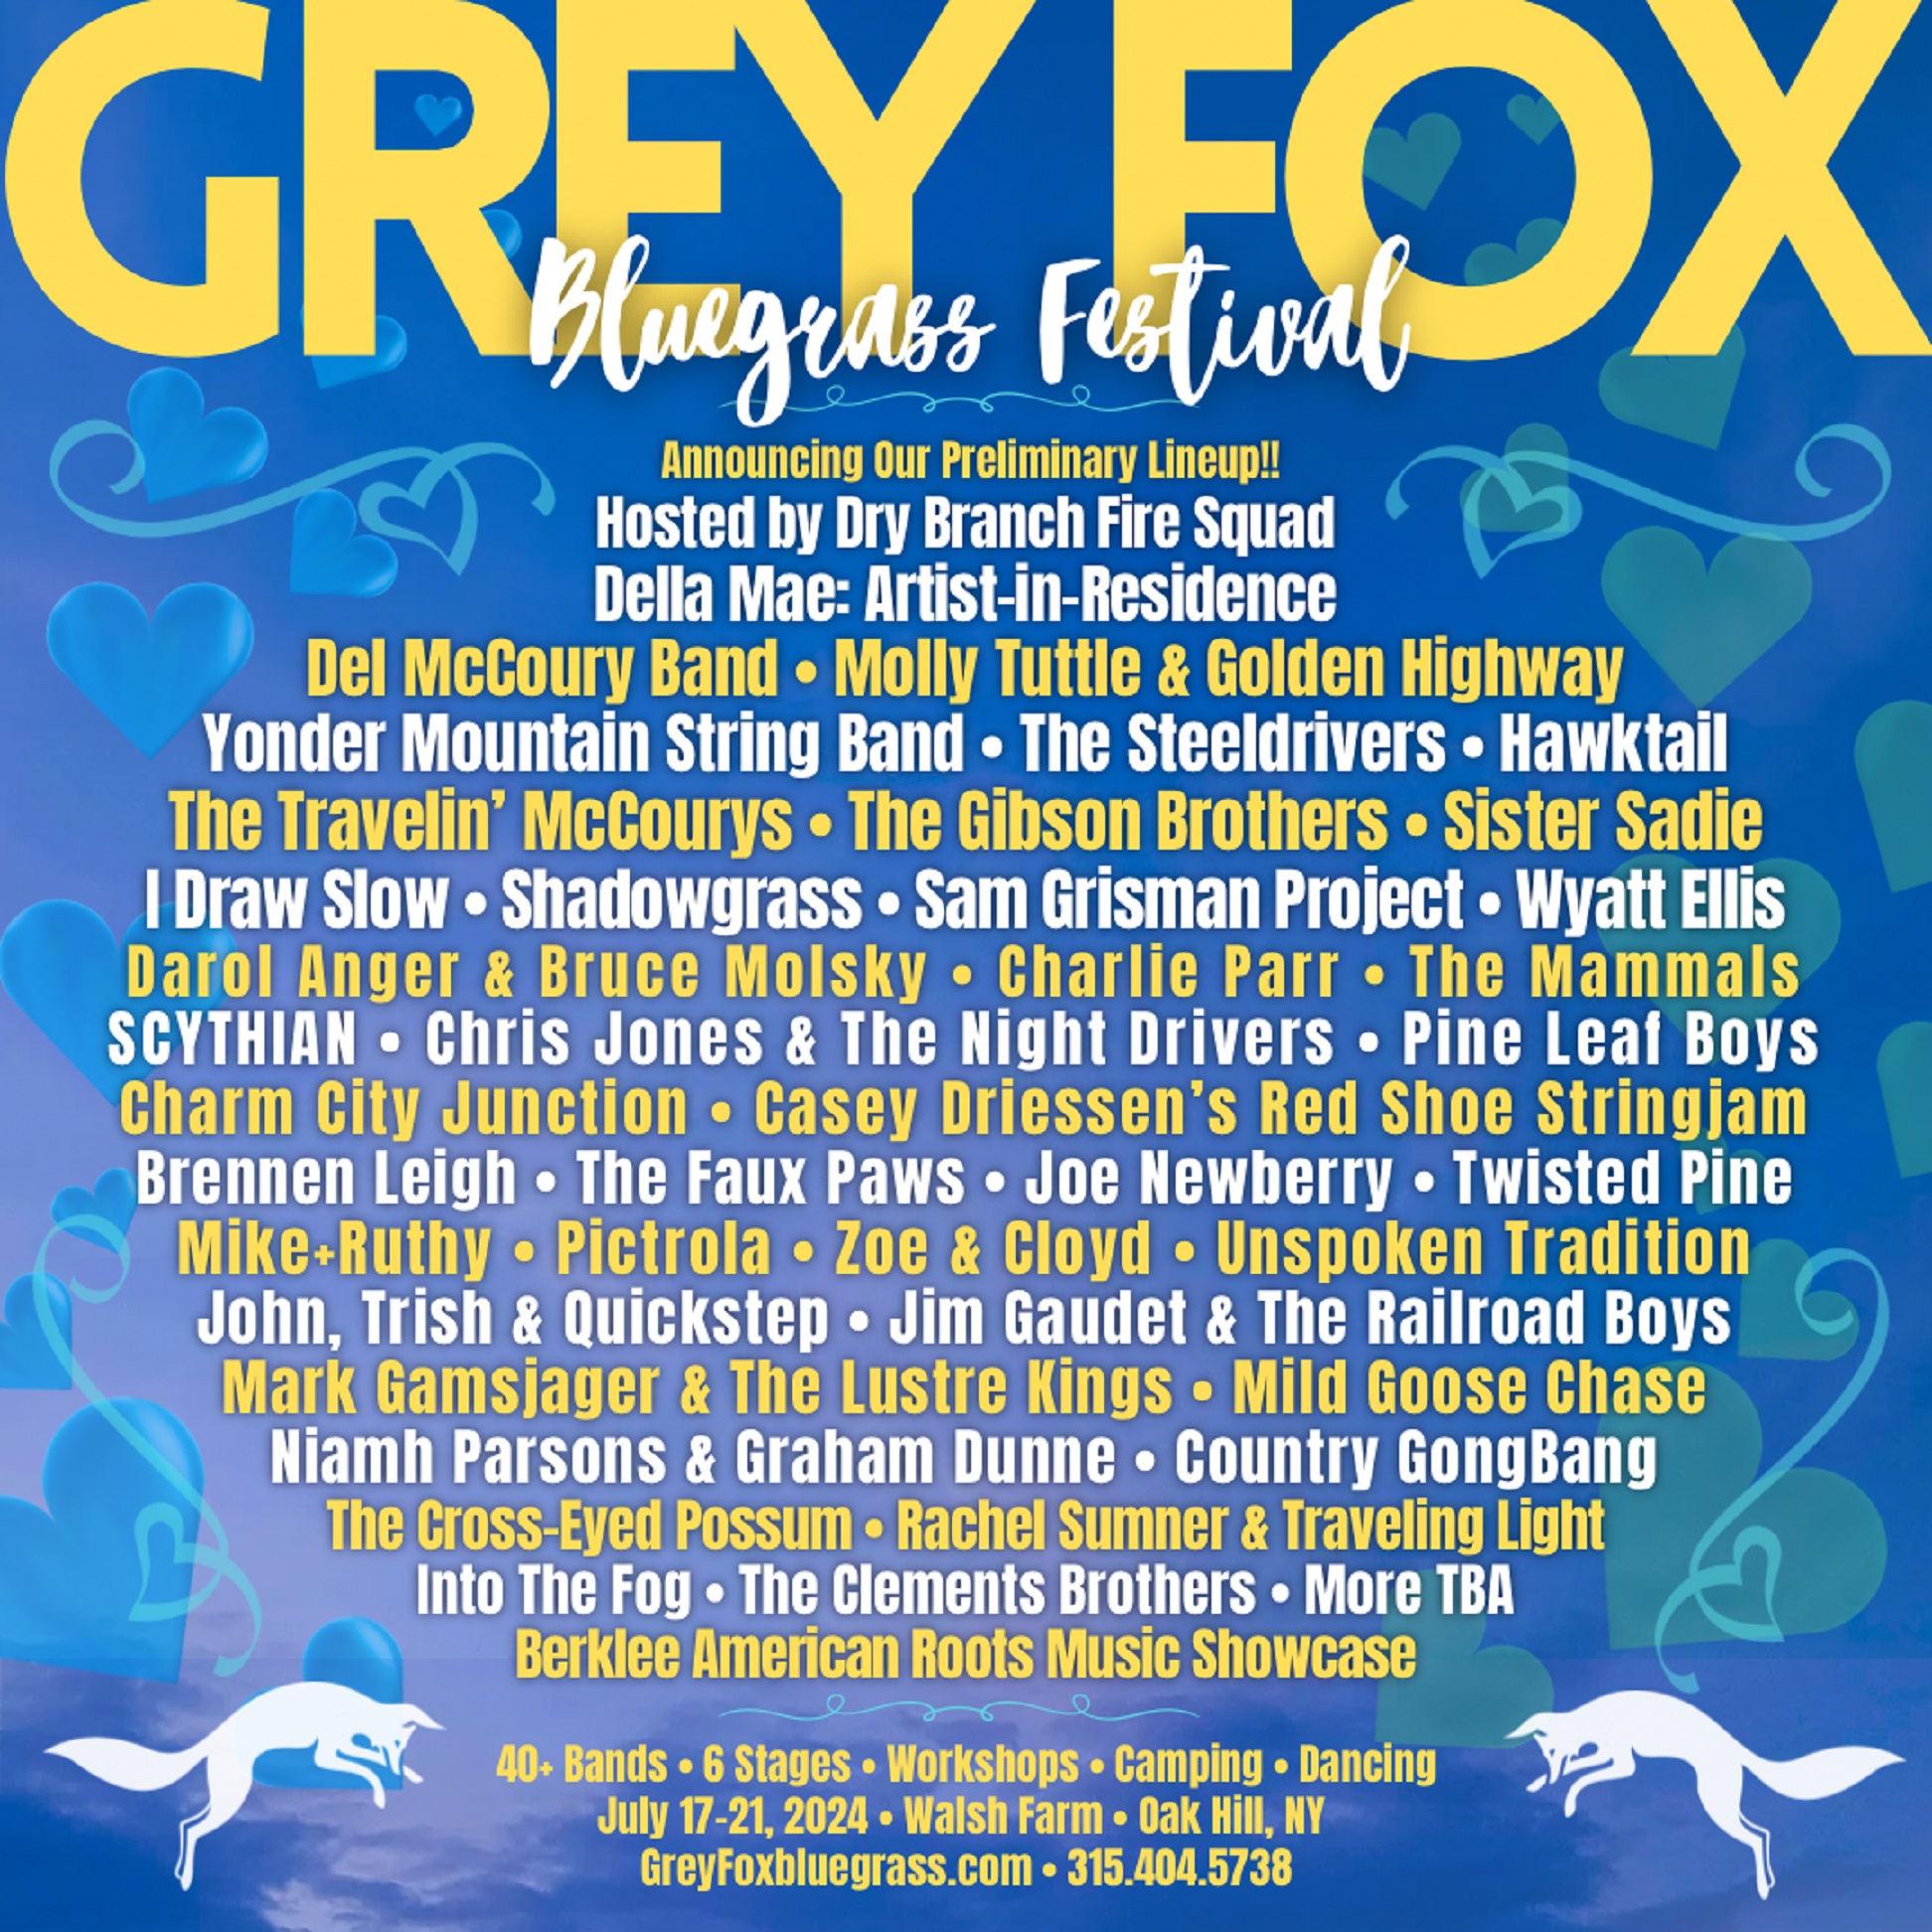 Grey Fox Bluegrass Festival Shares Initial 2024 Lineup; Del McCoury Band, Molly Tuttle & Golden Highway, Yonder Mountain String Band, and more